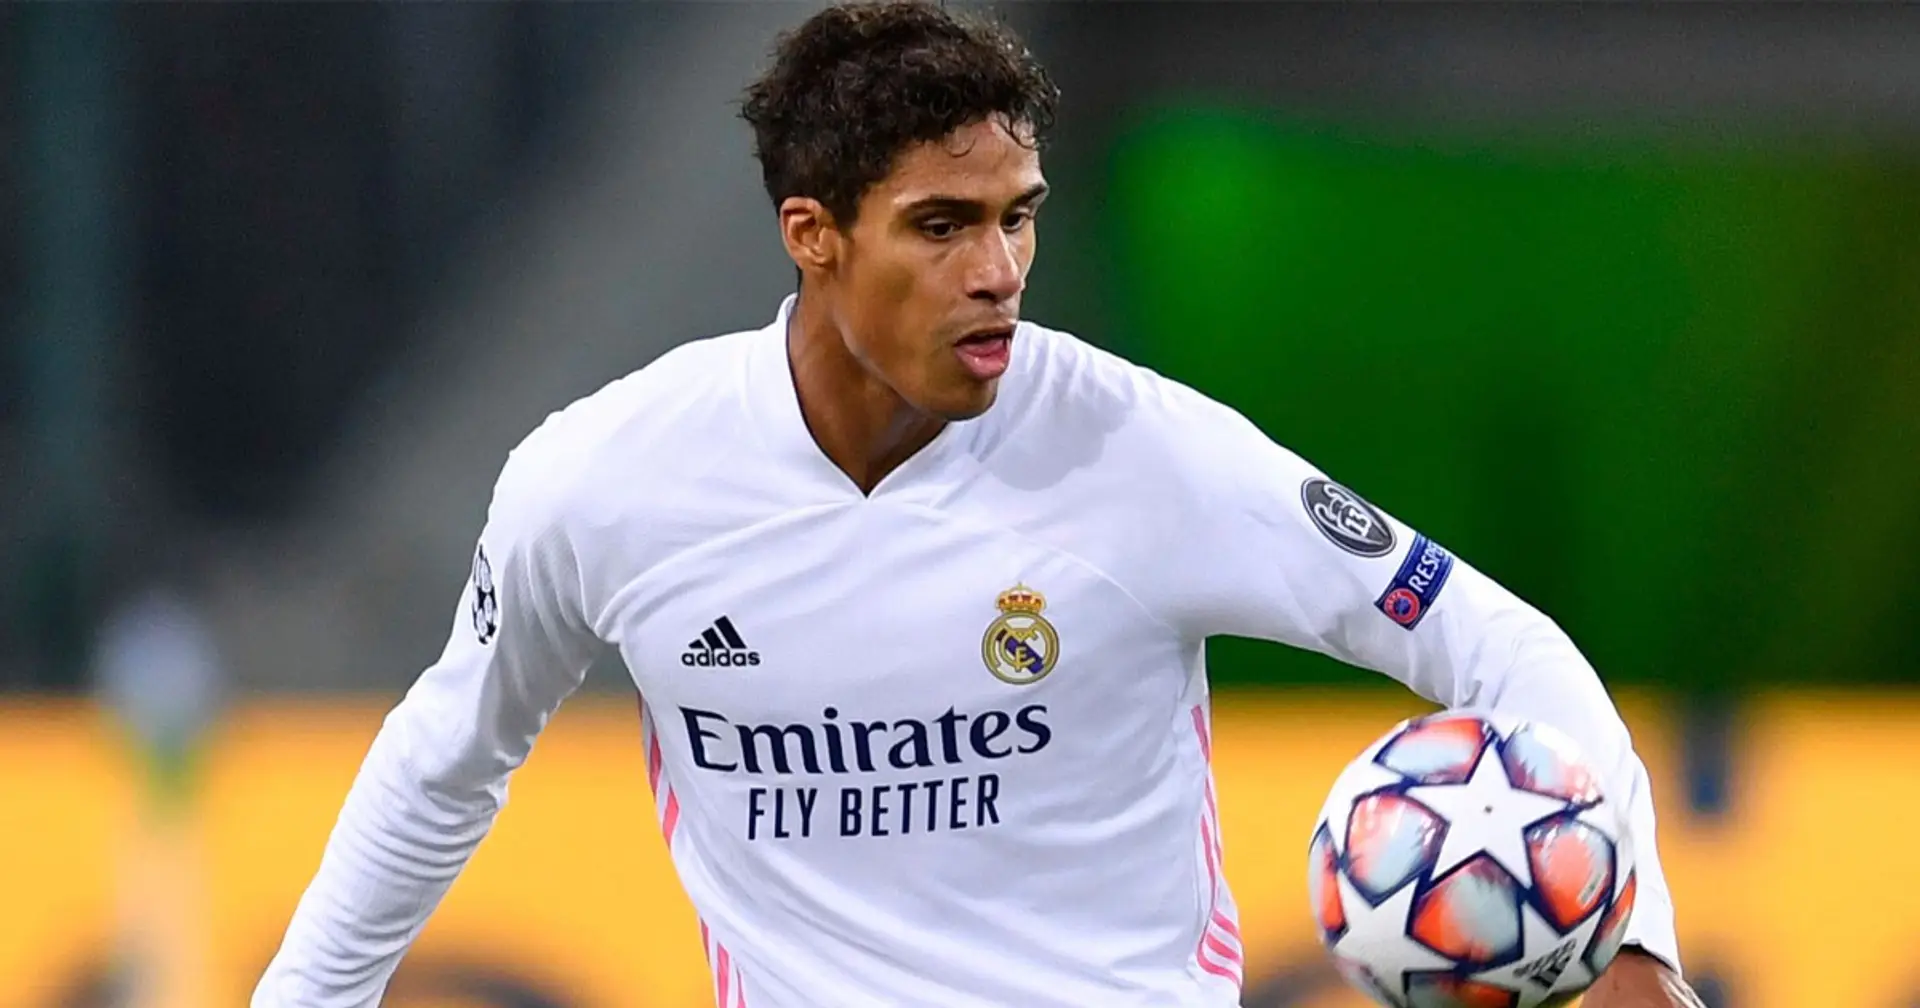 Real Madrid 'intend to sell' Varane this summer 3 more under-radar stories at Man United